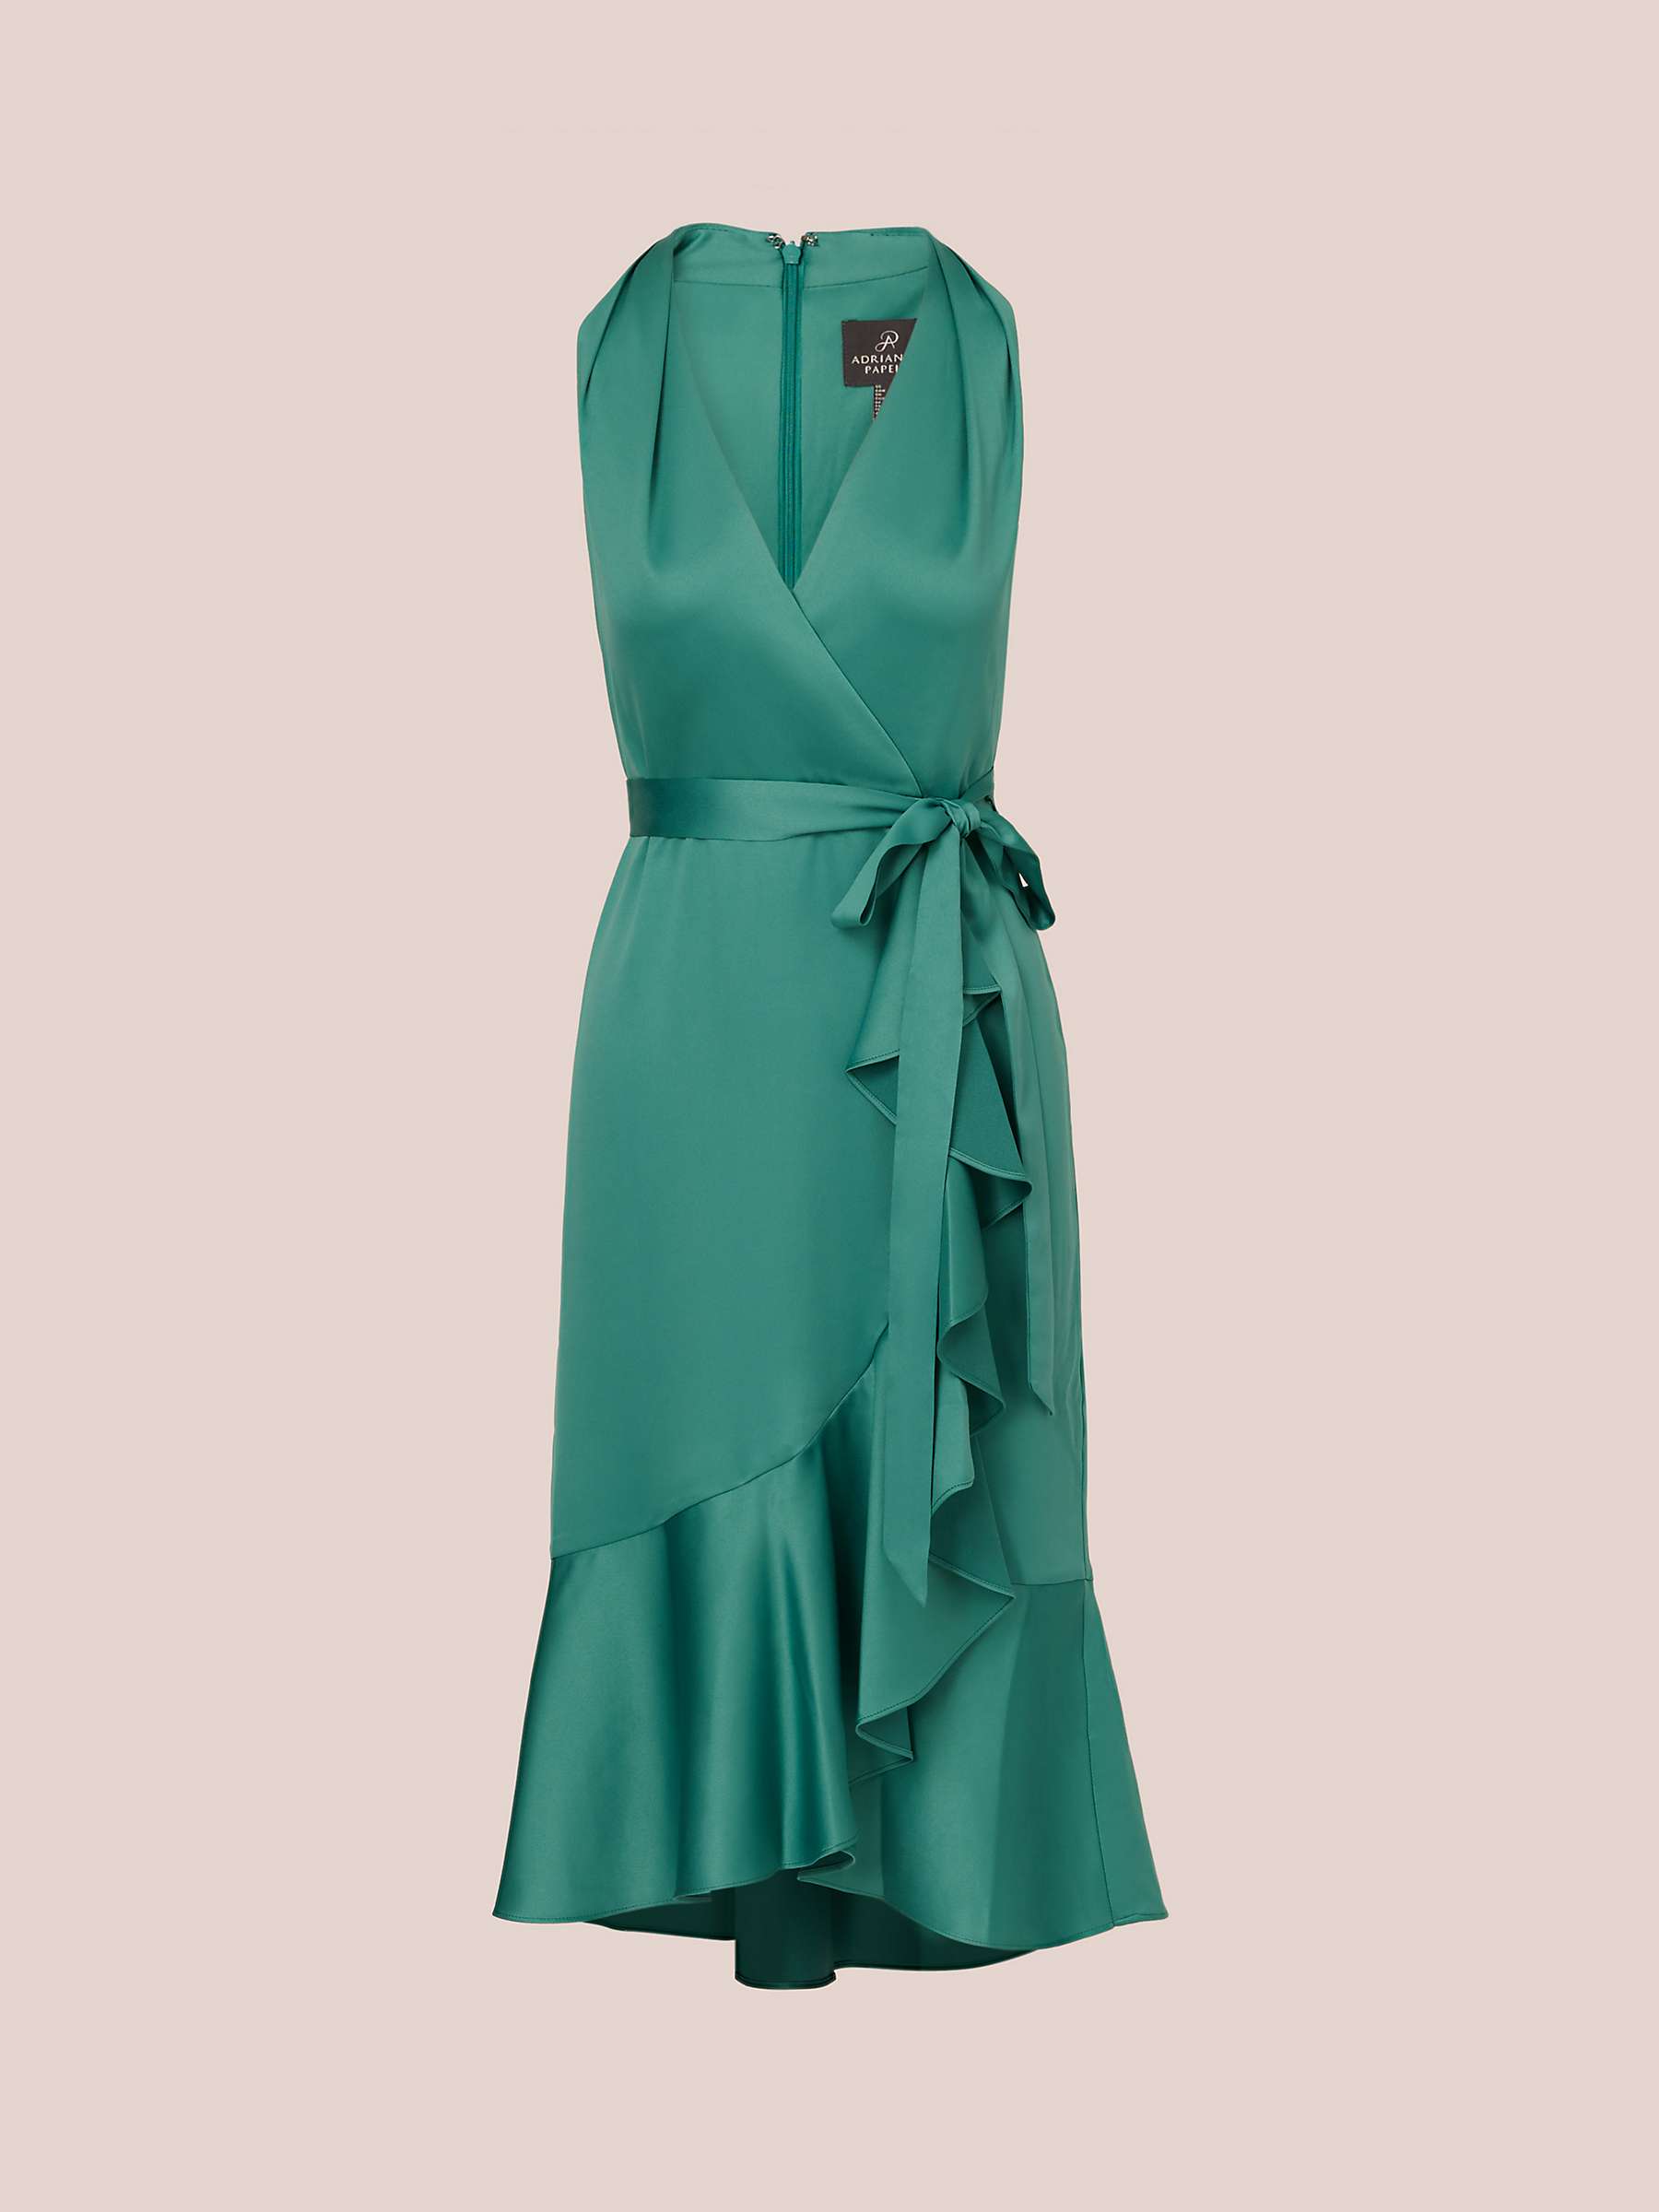 Buy Adrianna Papell Halter Neck Faux Wrap Midi Satin Dress, Jungle Green Online at johnlewis.com